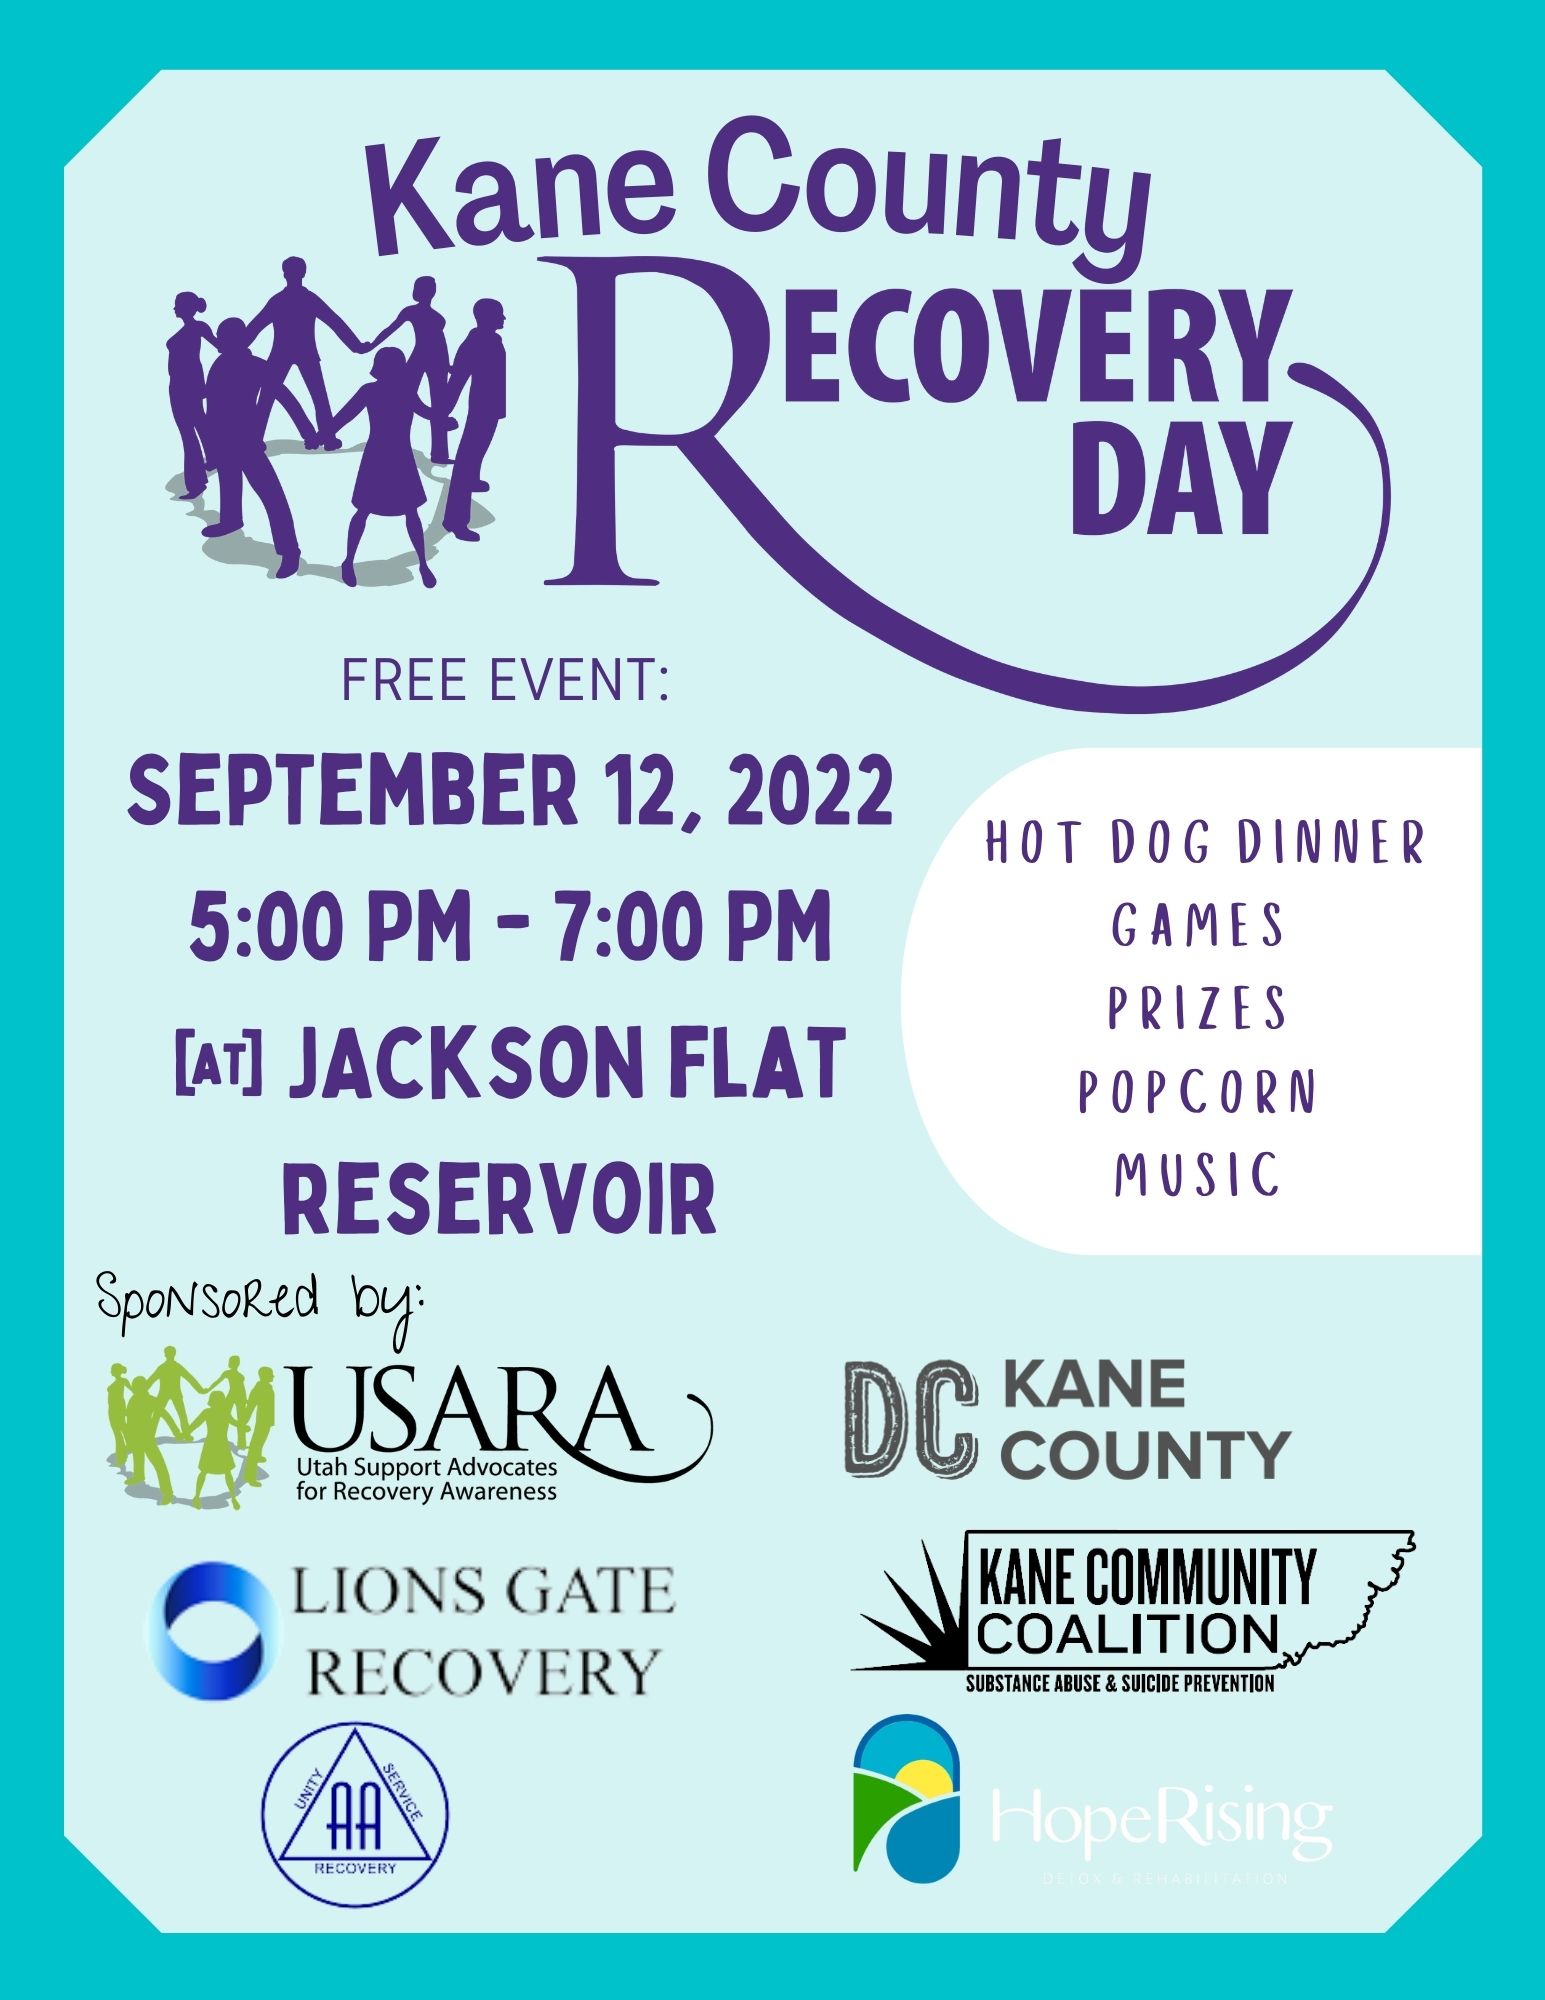 Kane County Recovery Day